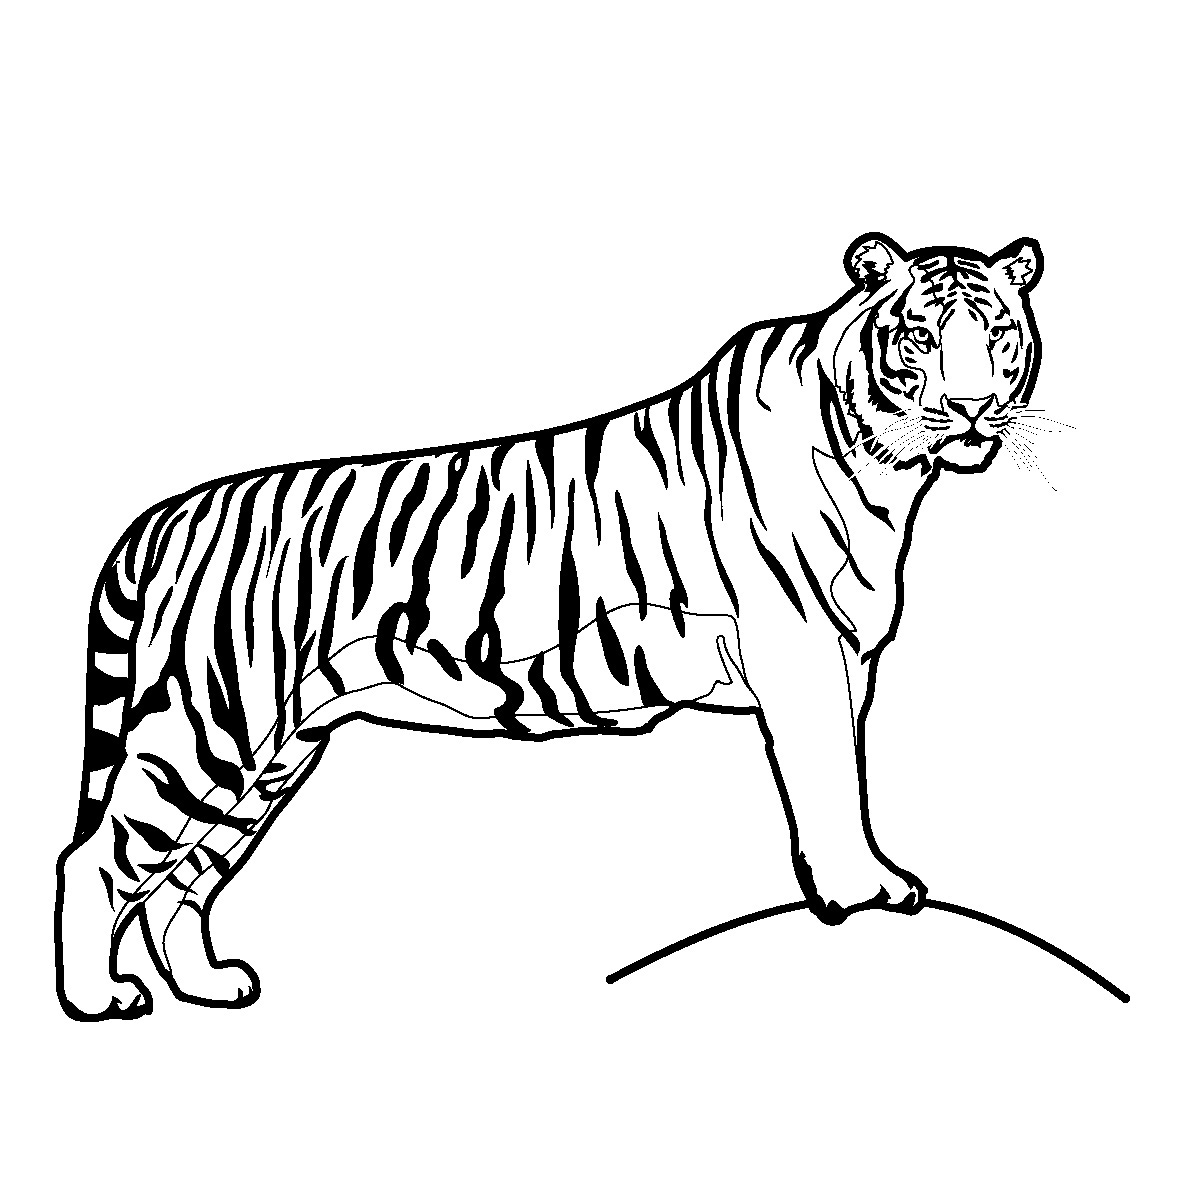 Running Tiger Clipart Black And White - Free ...